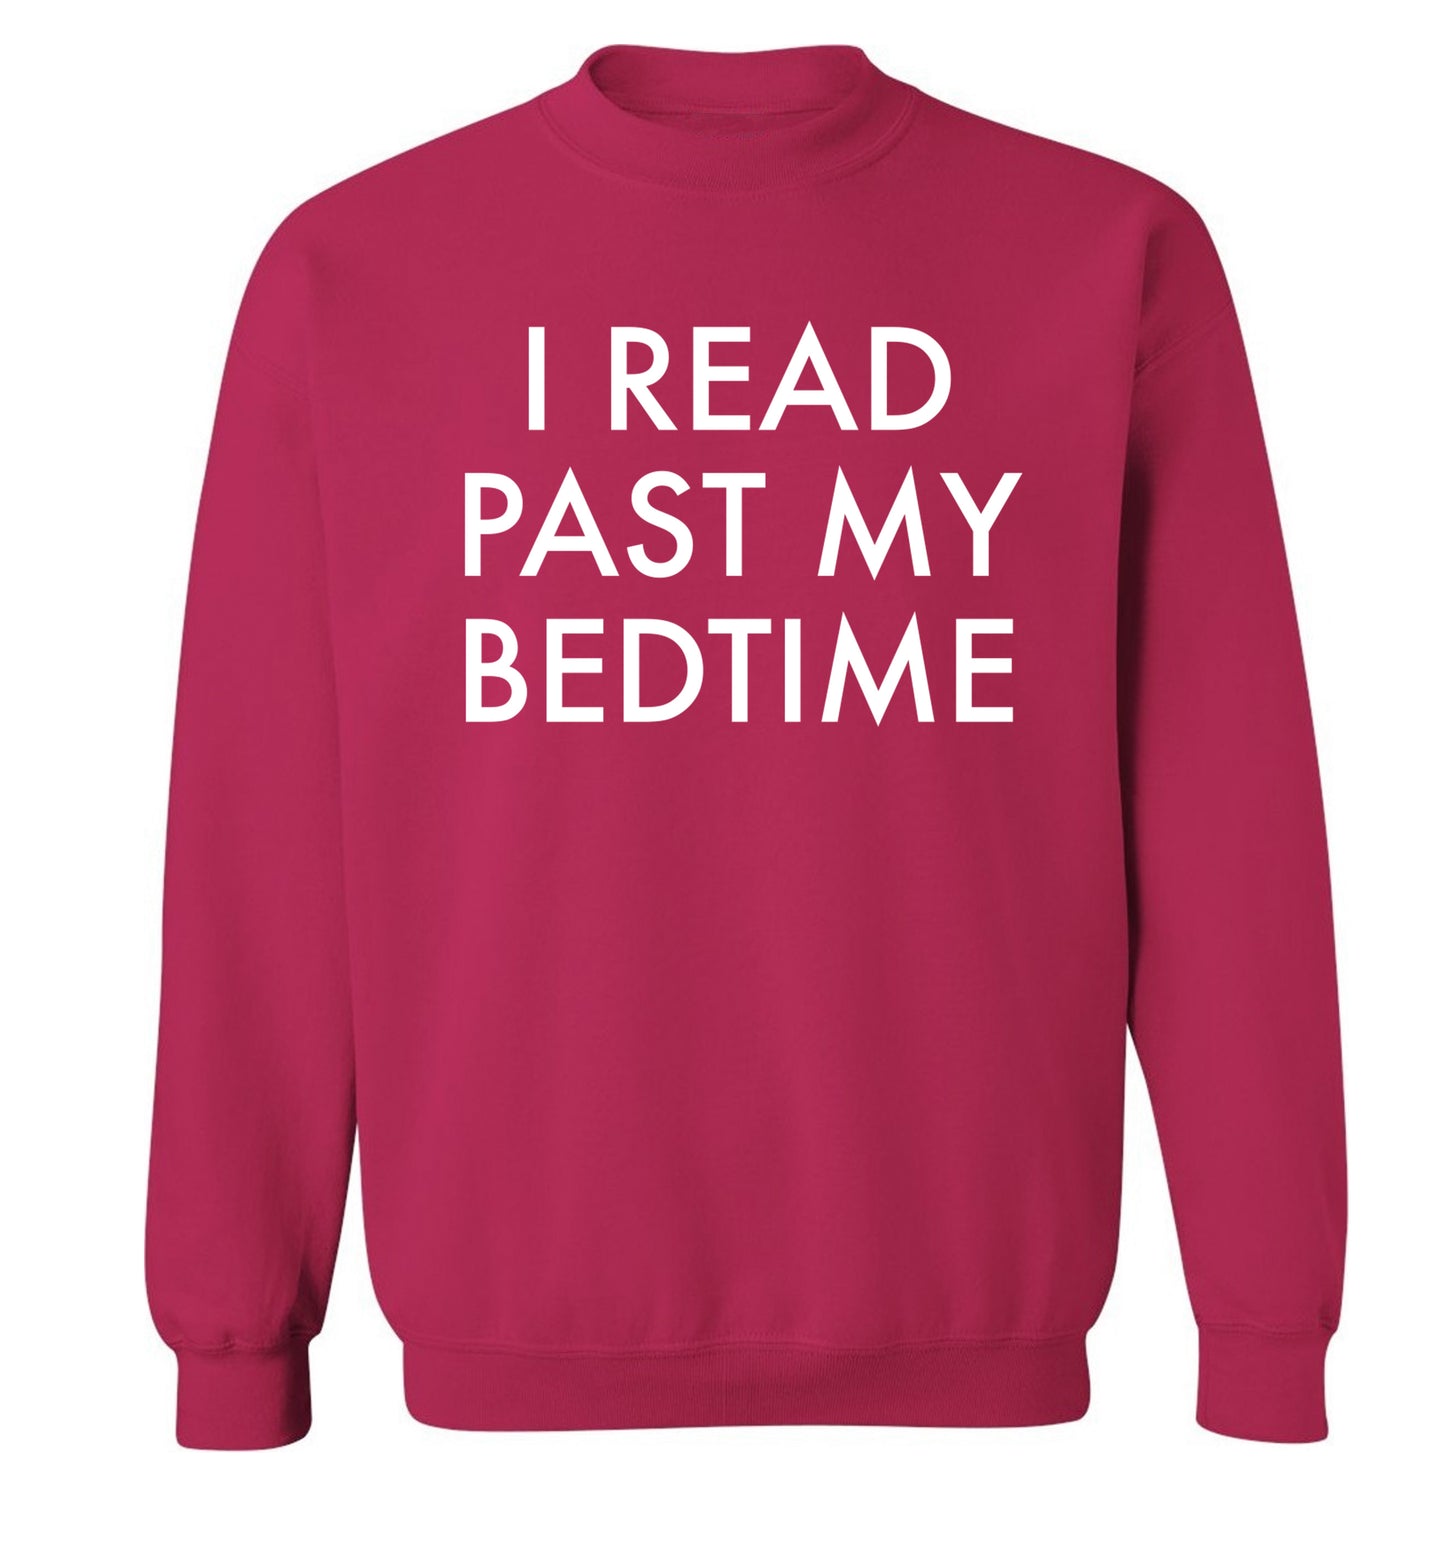 I read past my bedtime Adult's unisex pink Sweater 2XL